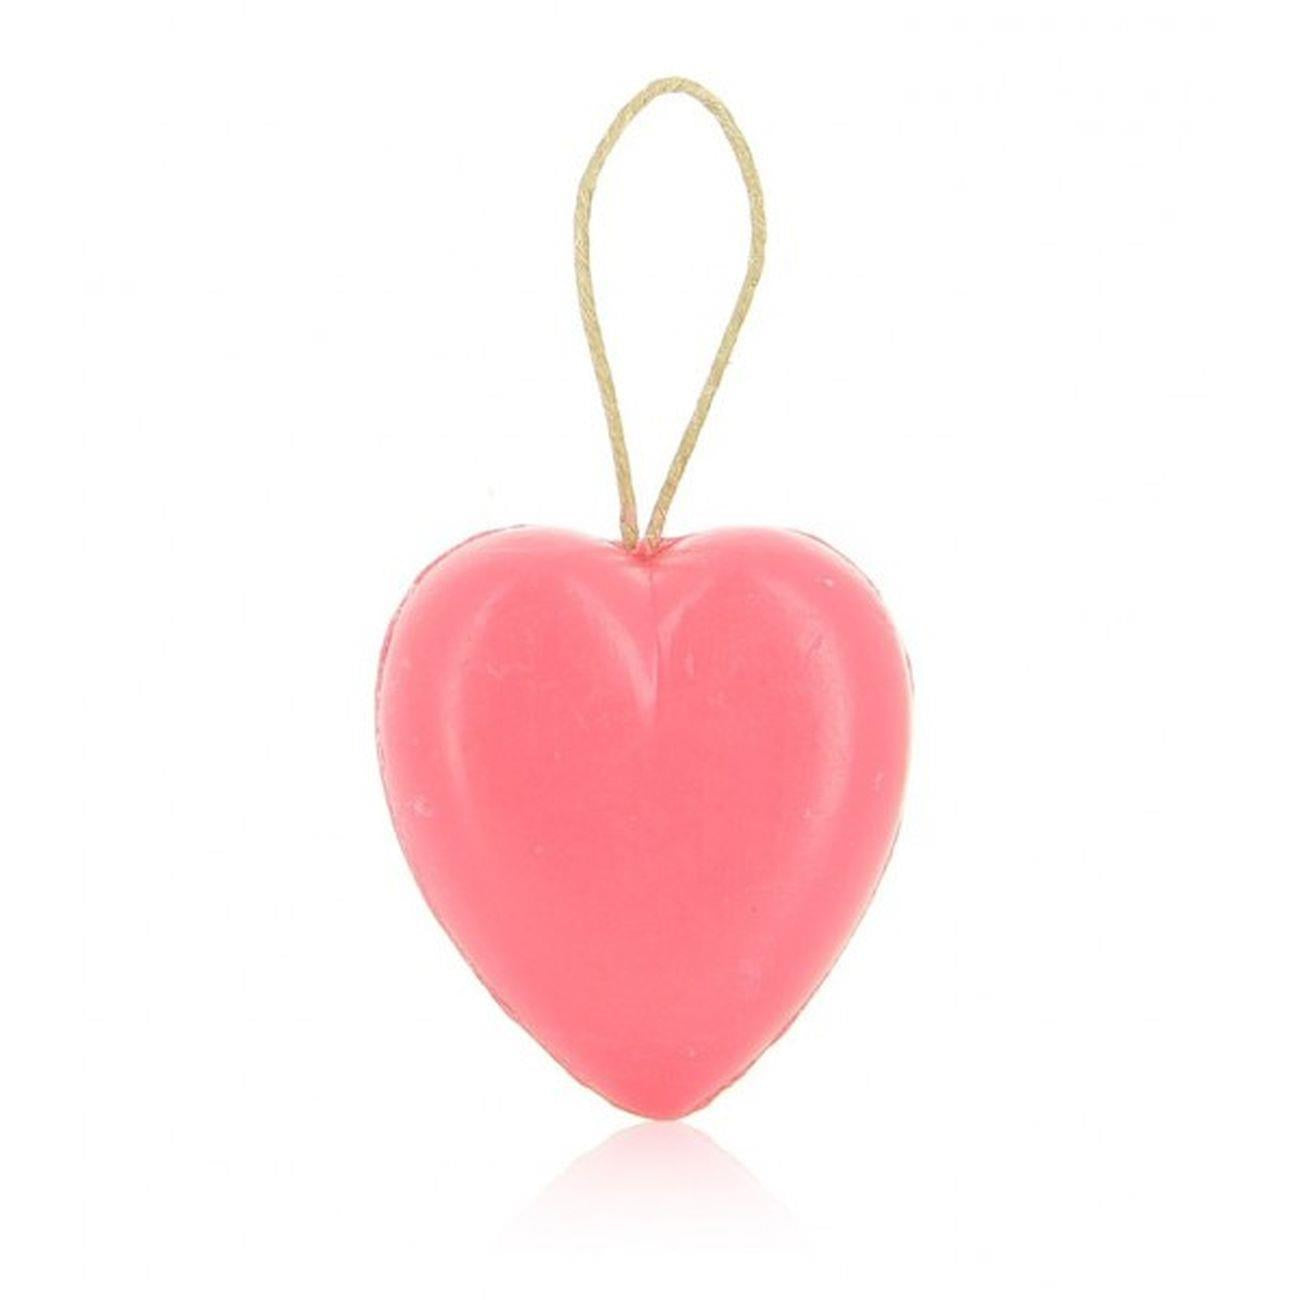 Marseille Soap Heart on Cord Red I Love You 90g